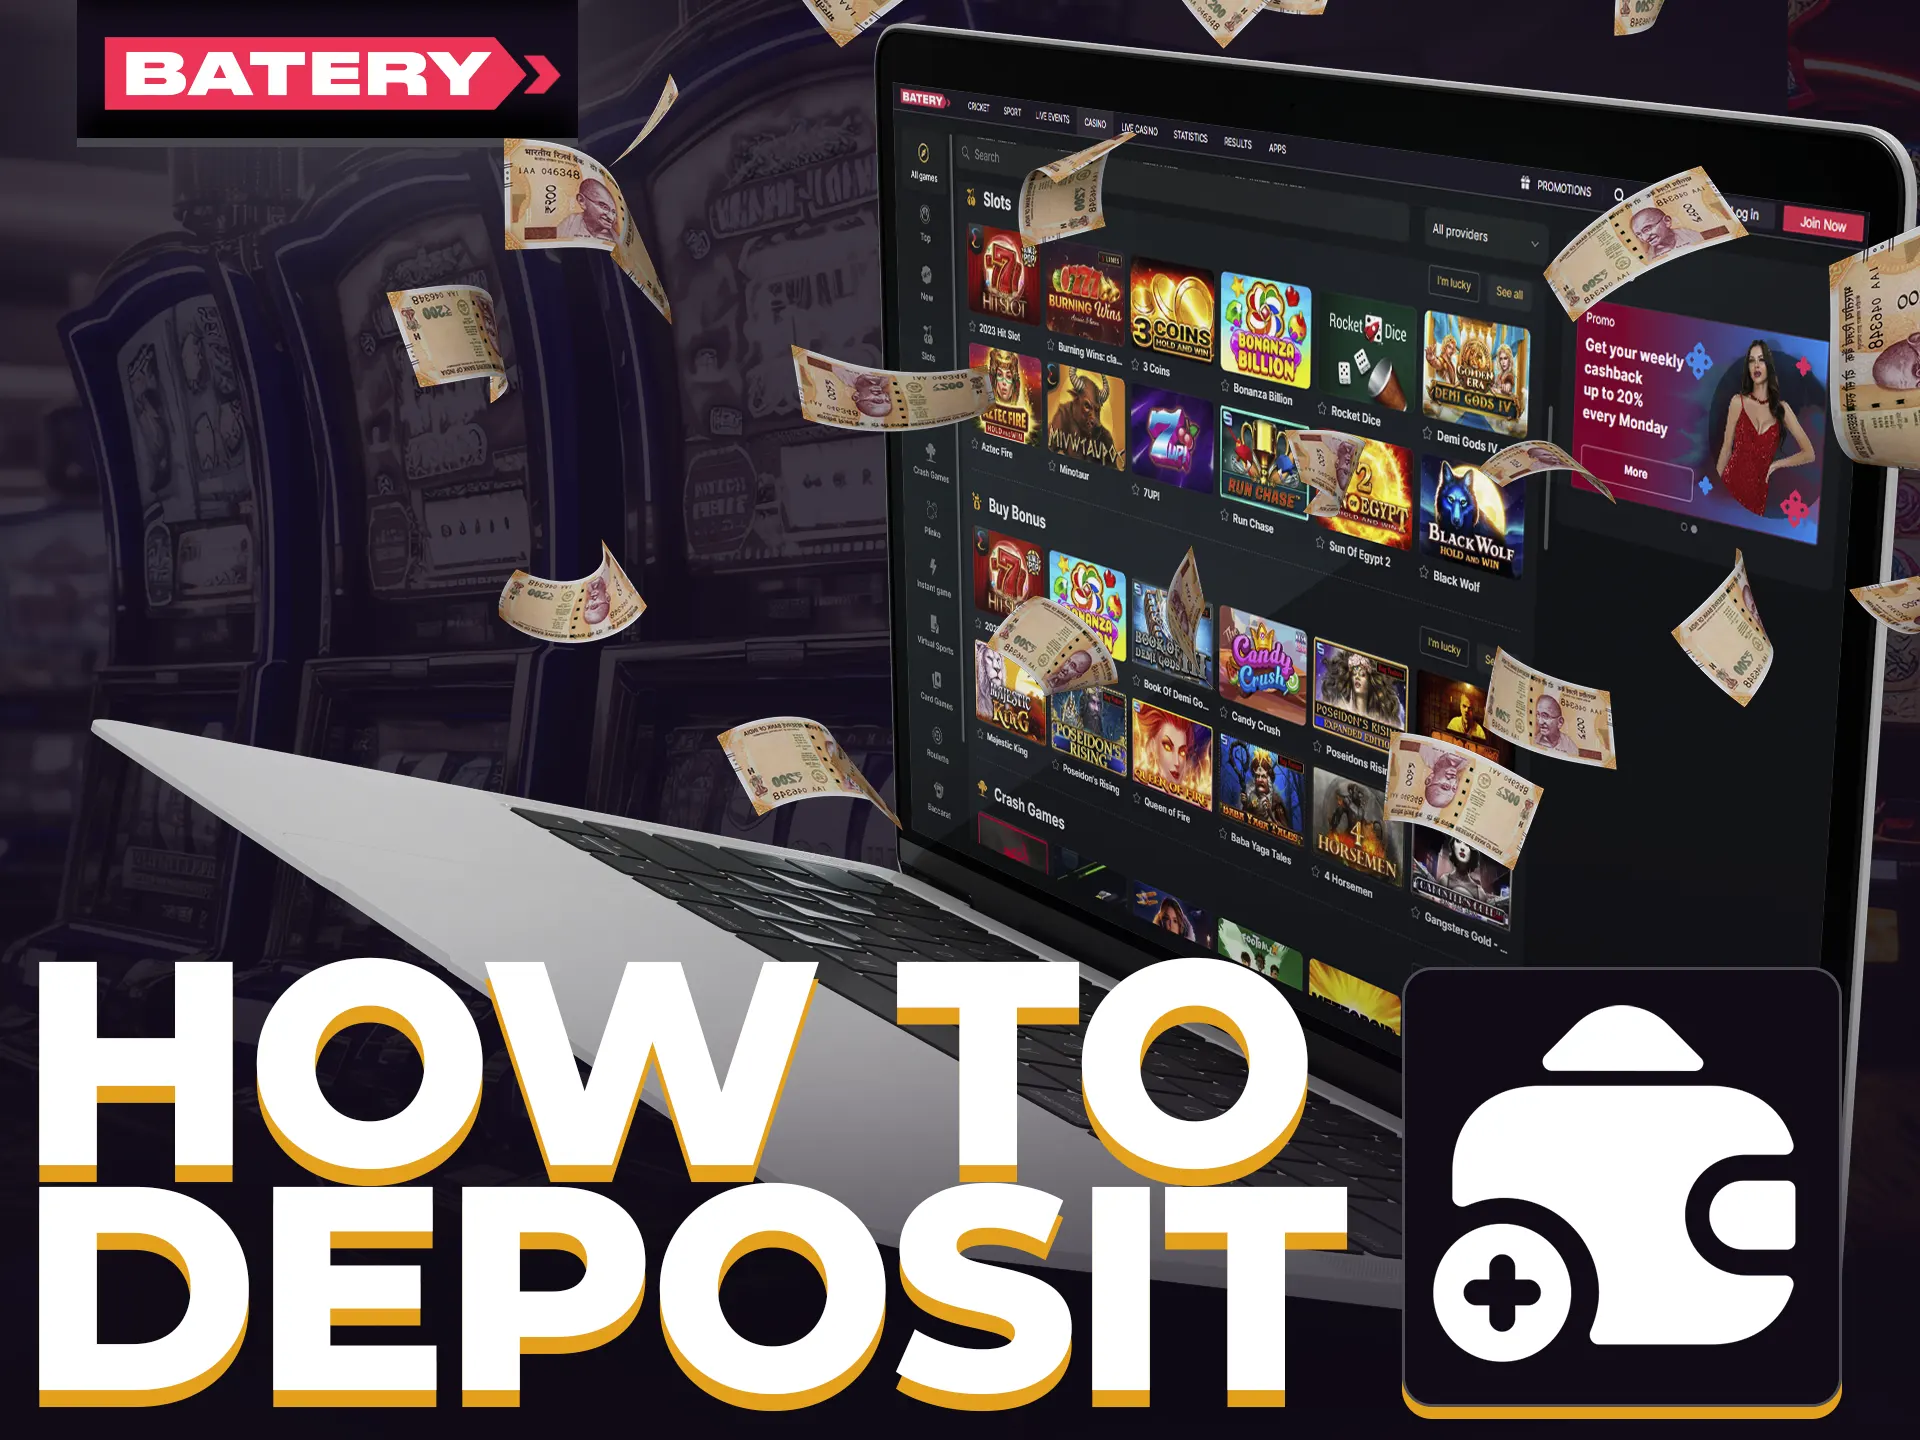 Deposit at Batery: Log in, visit payments, fill details and confirm.